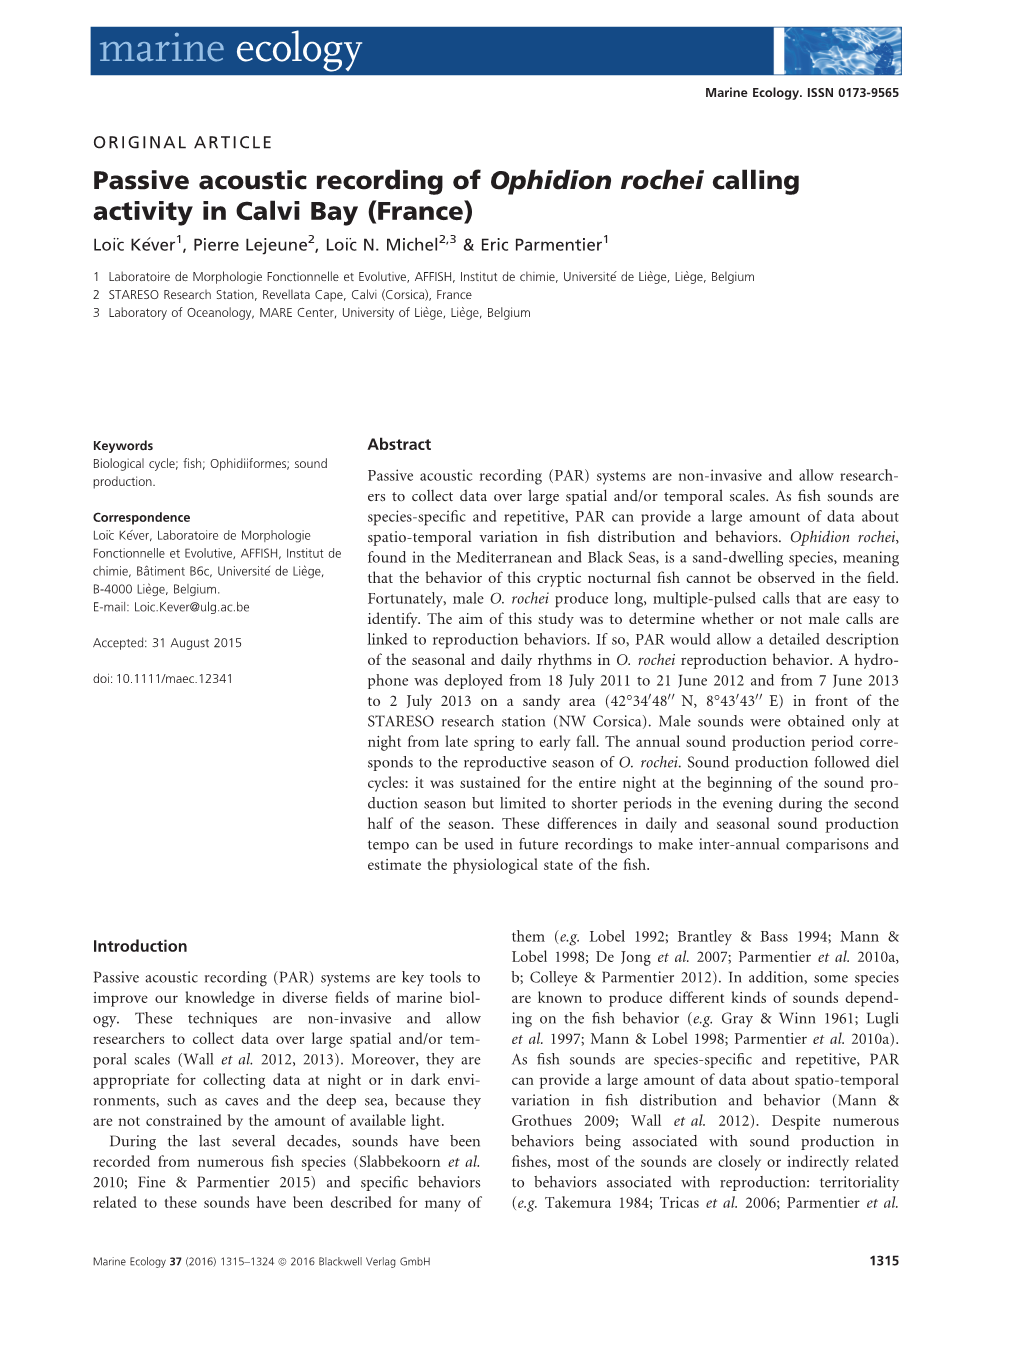 Passive Acoustic Recording of Ophidion Rochei Calling Activity in Calvi Bay (France) Lo€Ic Kever� 1, Pierre Lejeune2,Lo€Ic N